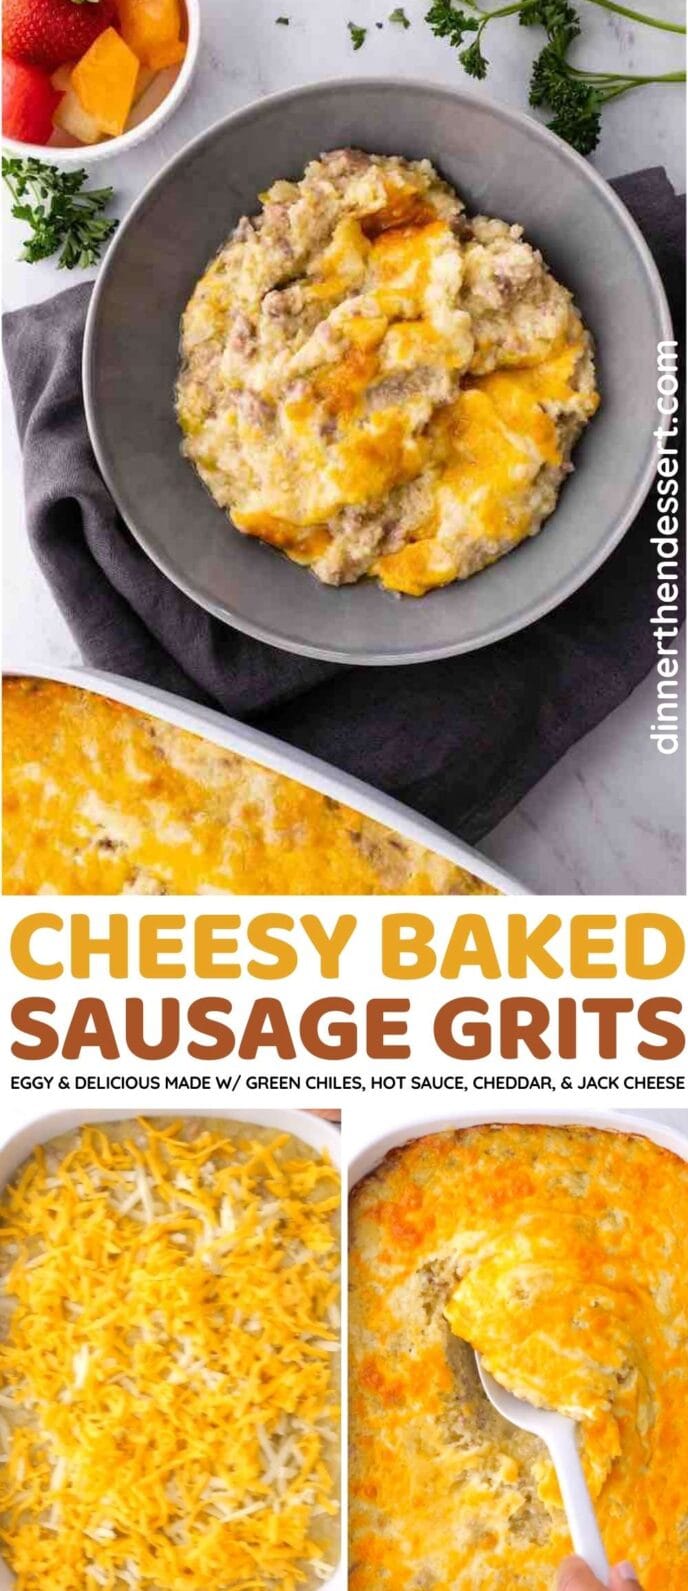 Cheesy Baked Sausage Grits collage